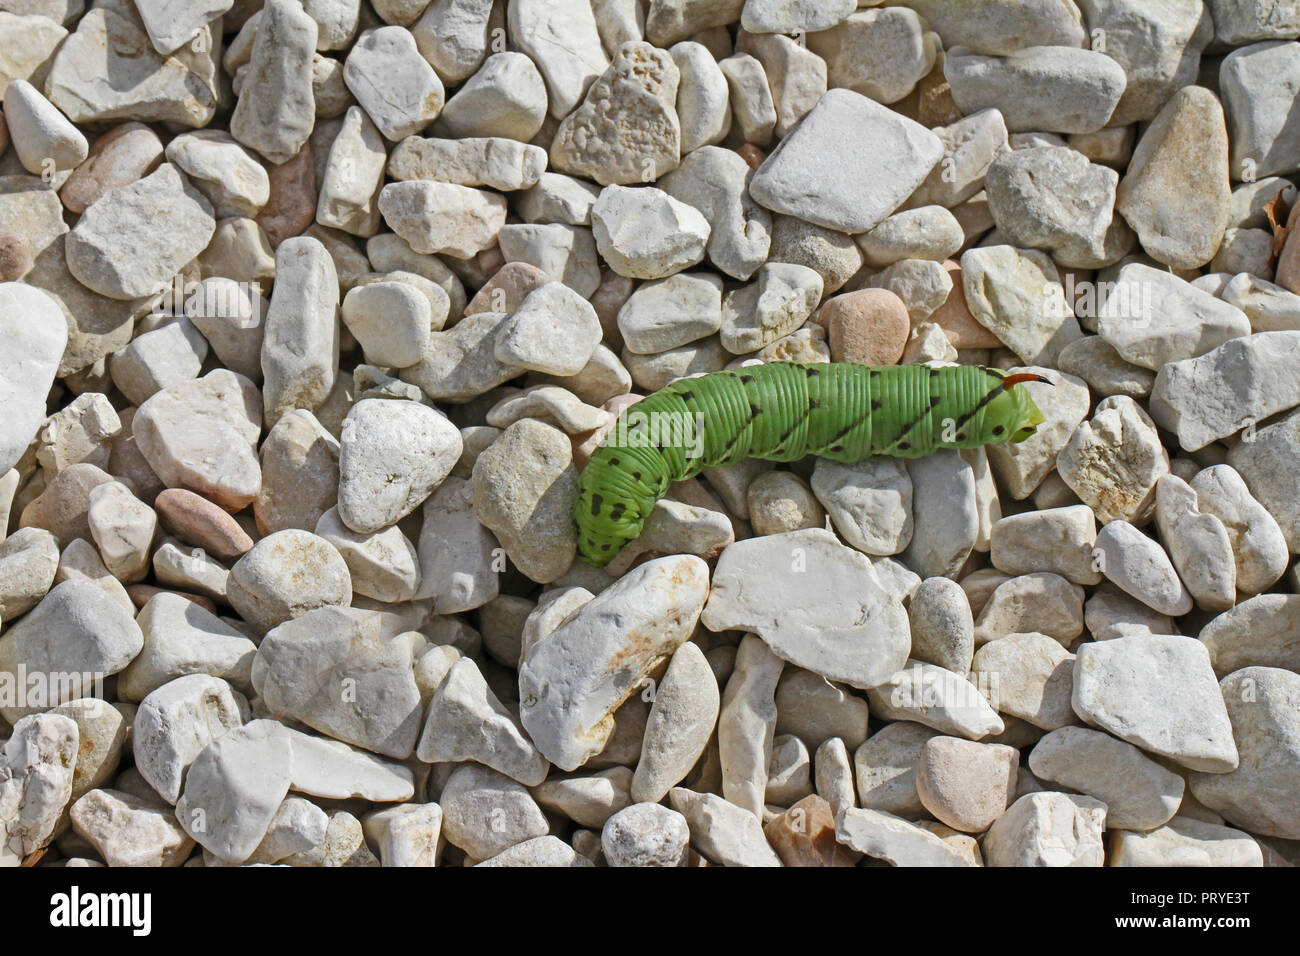 Tomato hornworm Latin manduca quinquemaculata in Italy similar to a tobacco hornworm Latin manduca sexta but that species isn't native to Italy Stock Photo